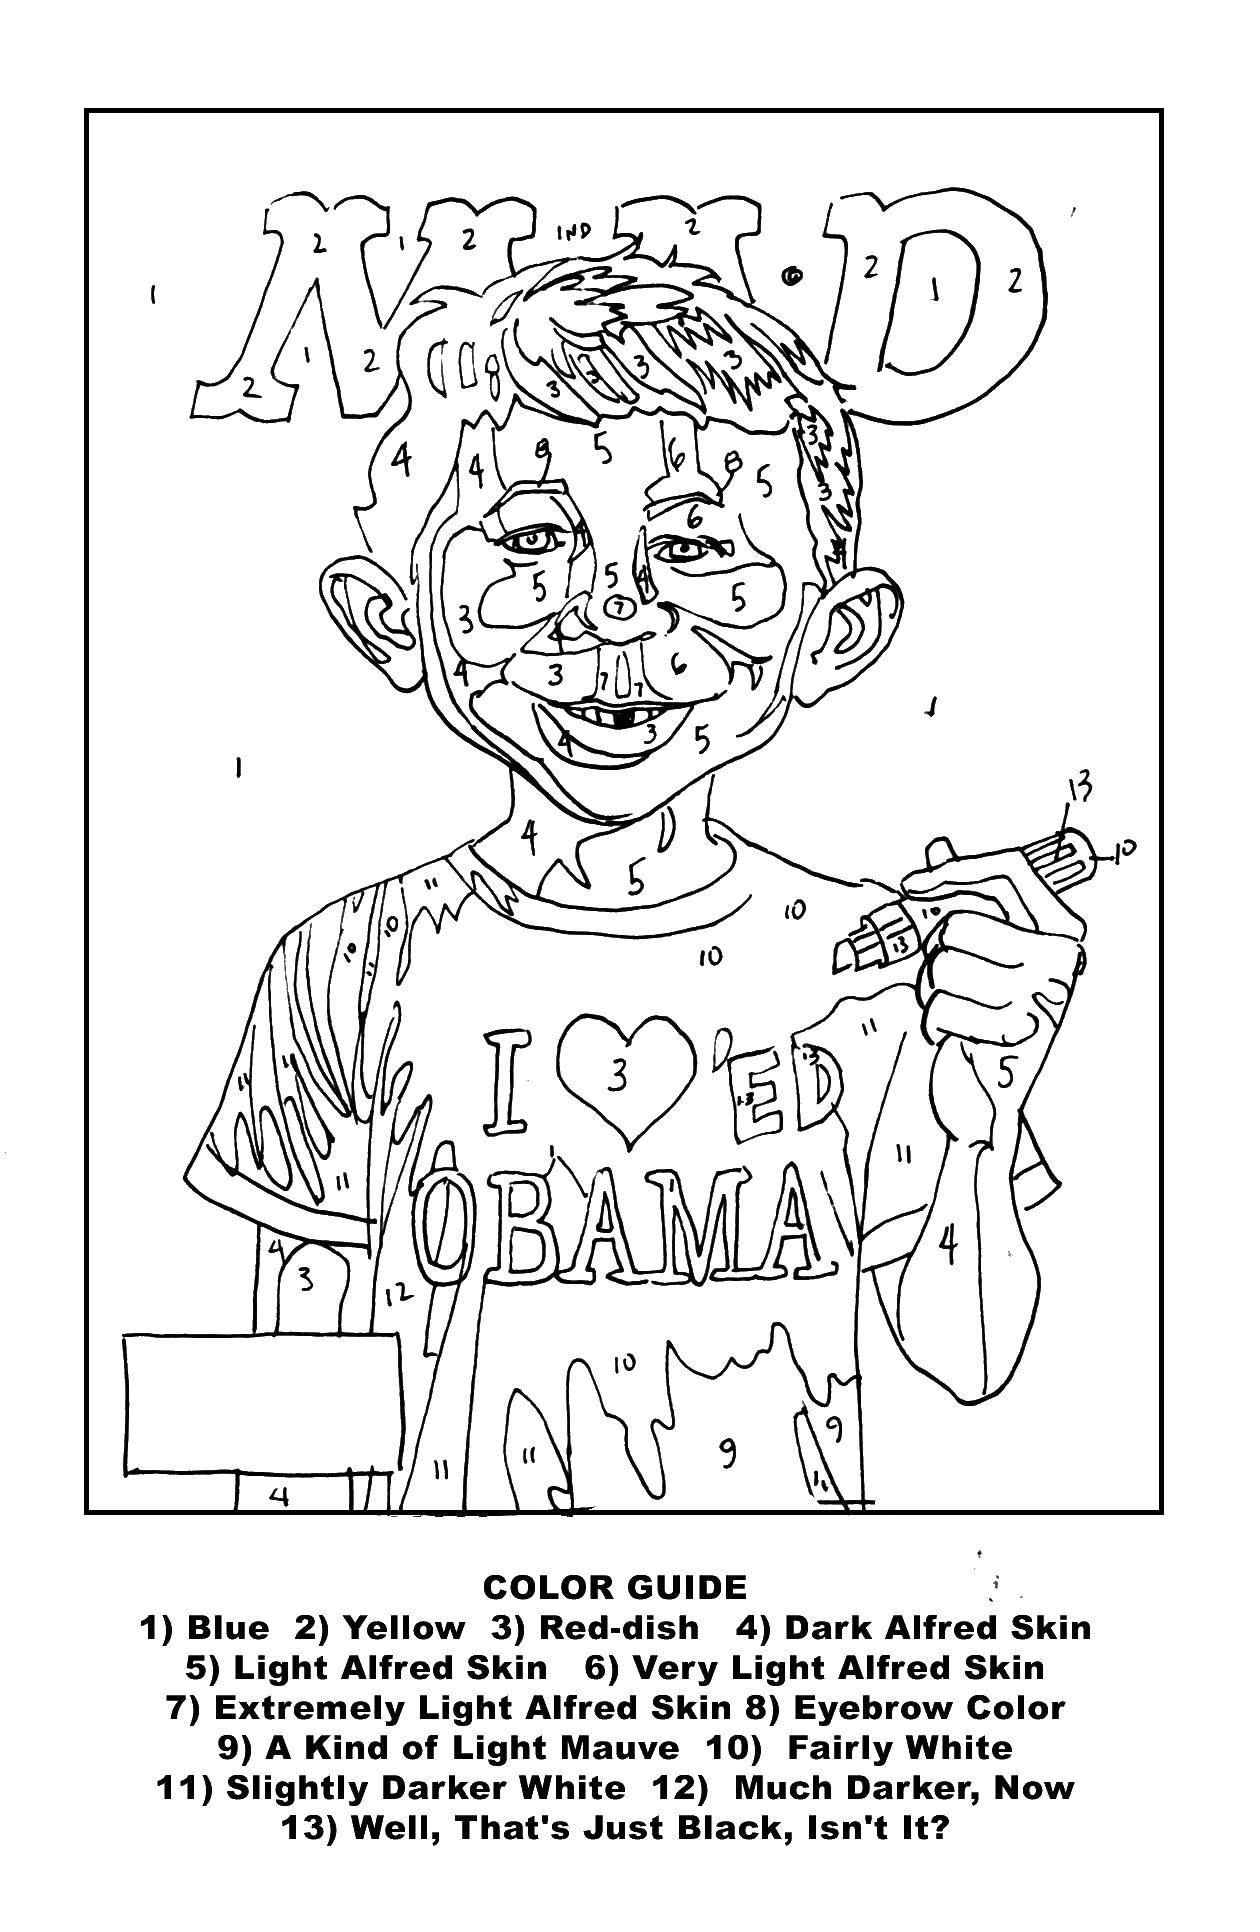 Coloring The boy with the marker. Category That number. Tags:  boy, t-shirt, marker.